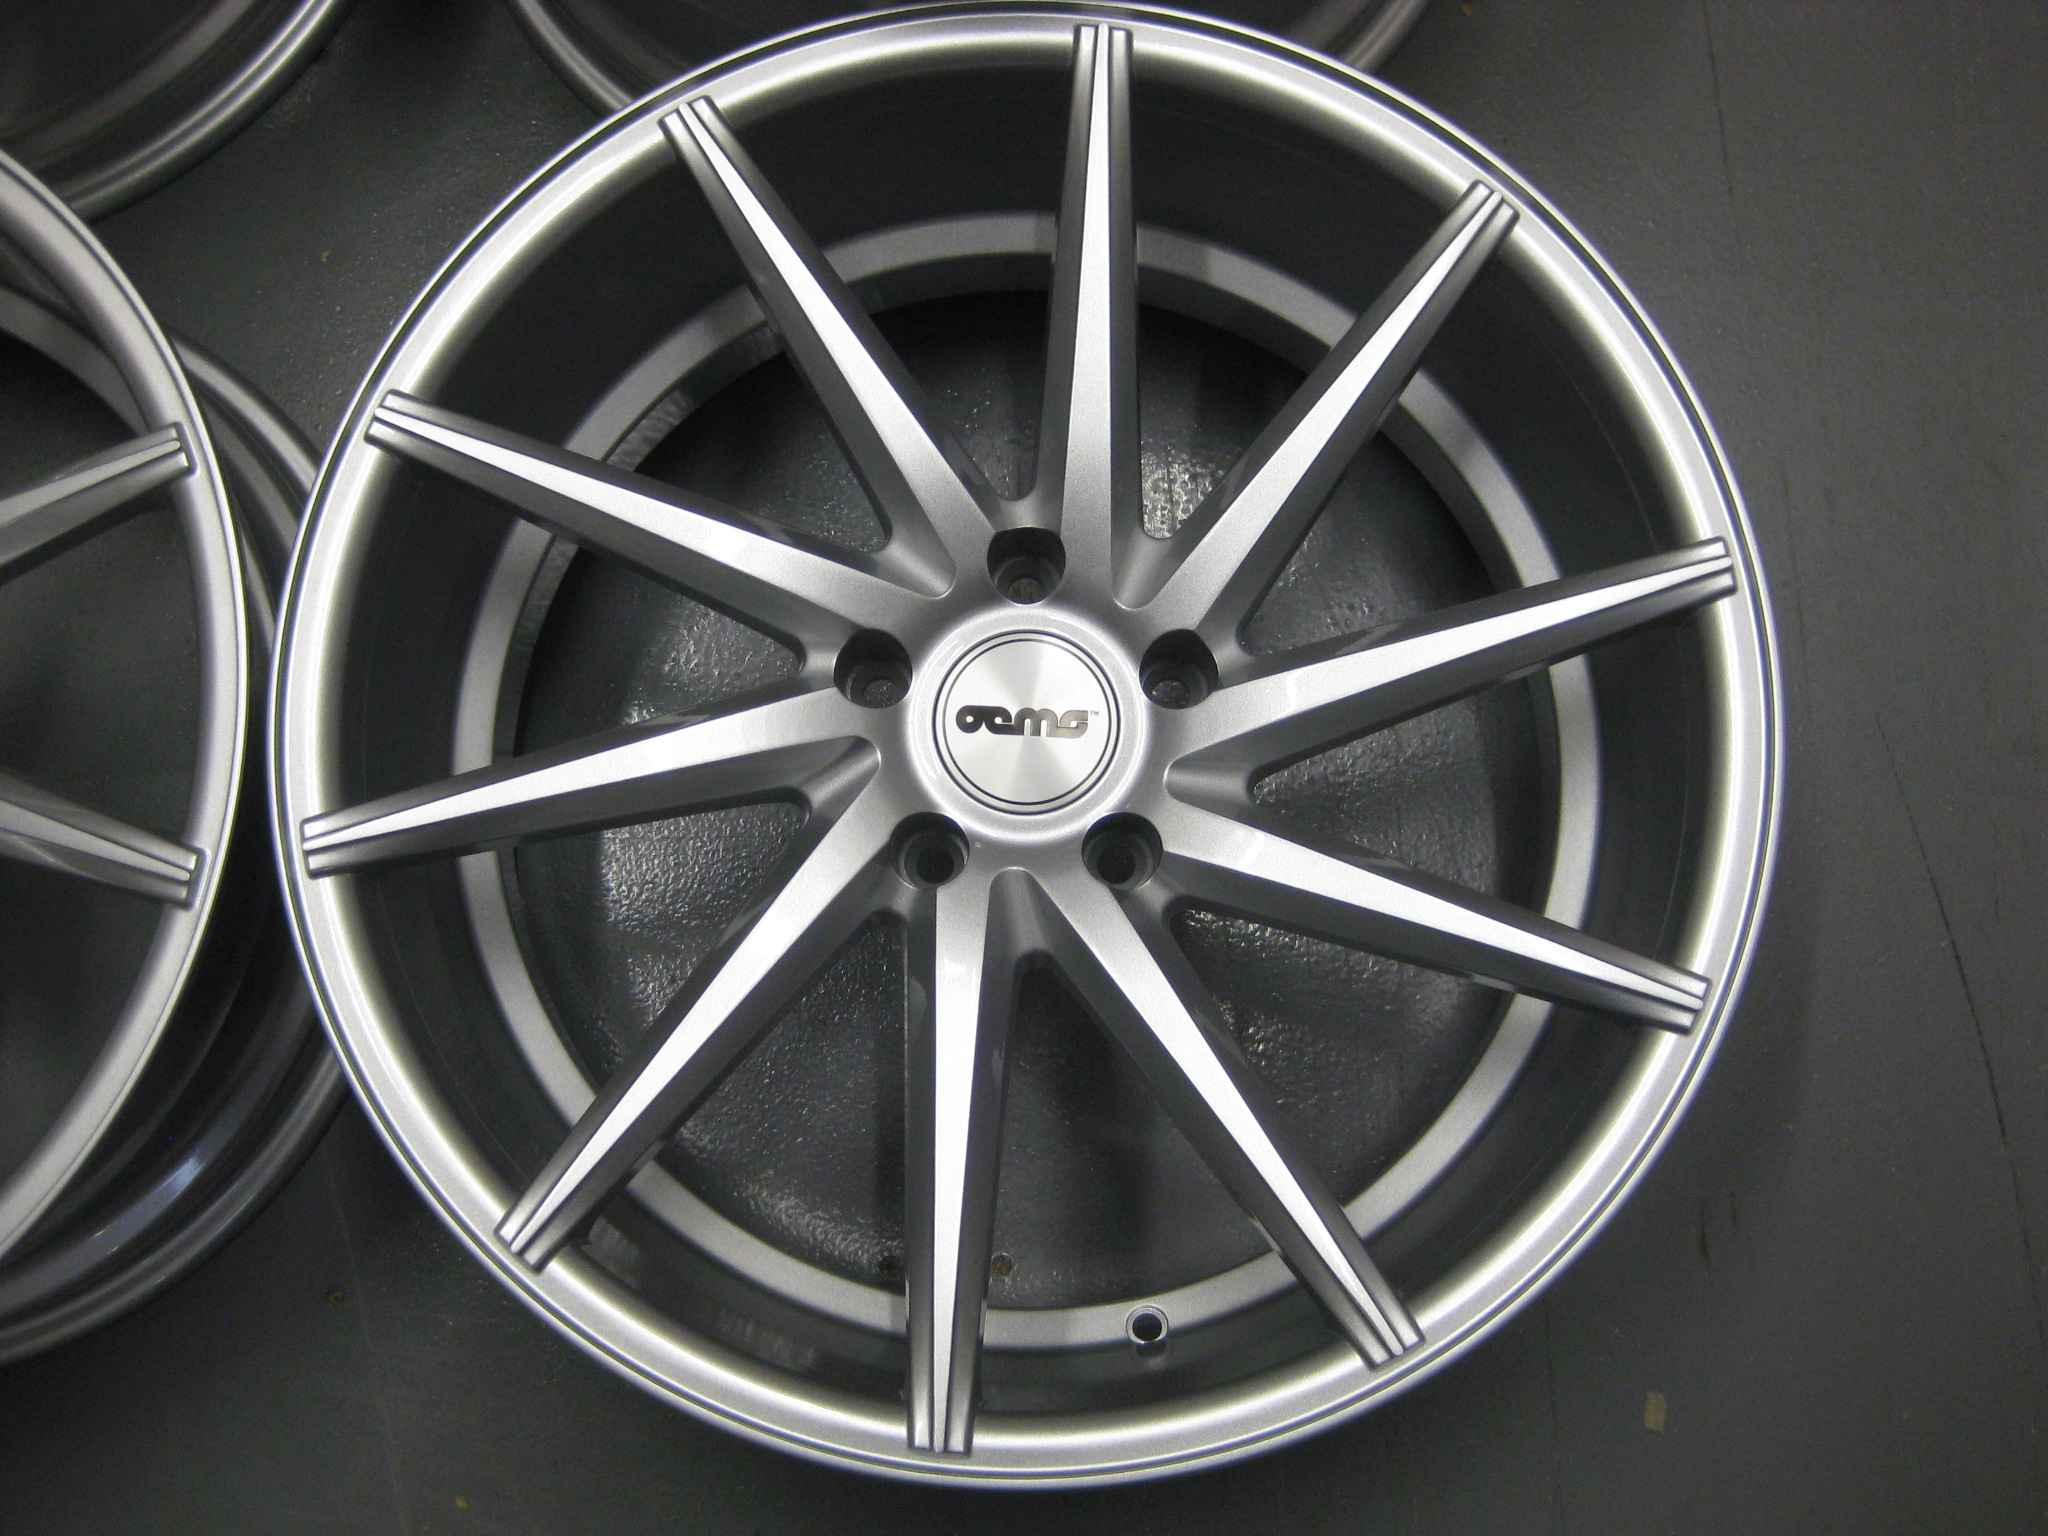 NEW 20  OEMS CVT DIRECTIONAL ALLOY WHEELS IN SILVER  WIDER 10  REAR